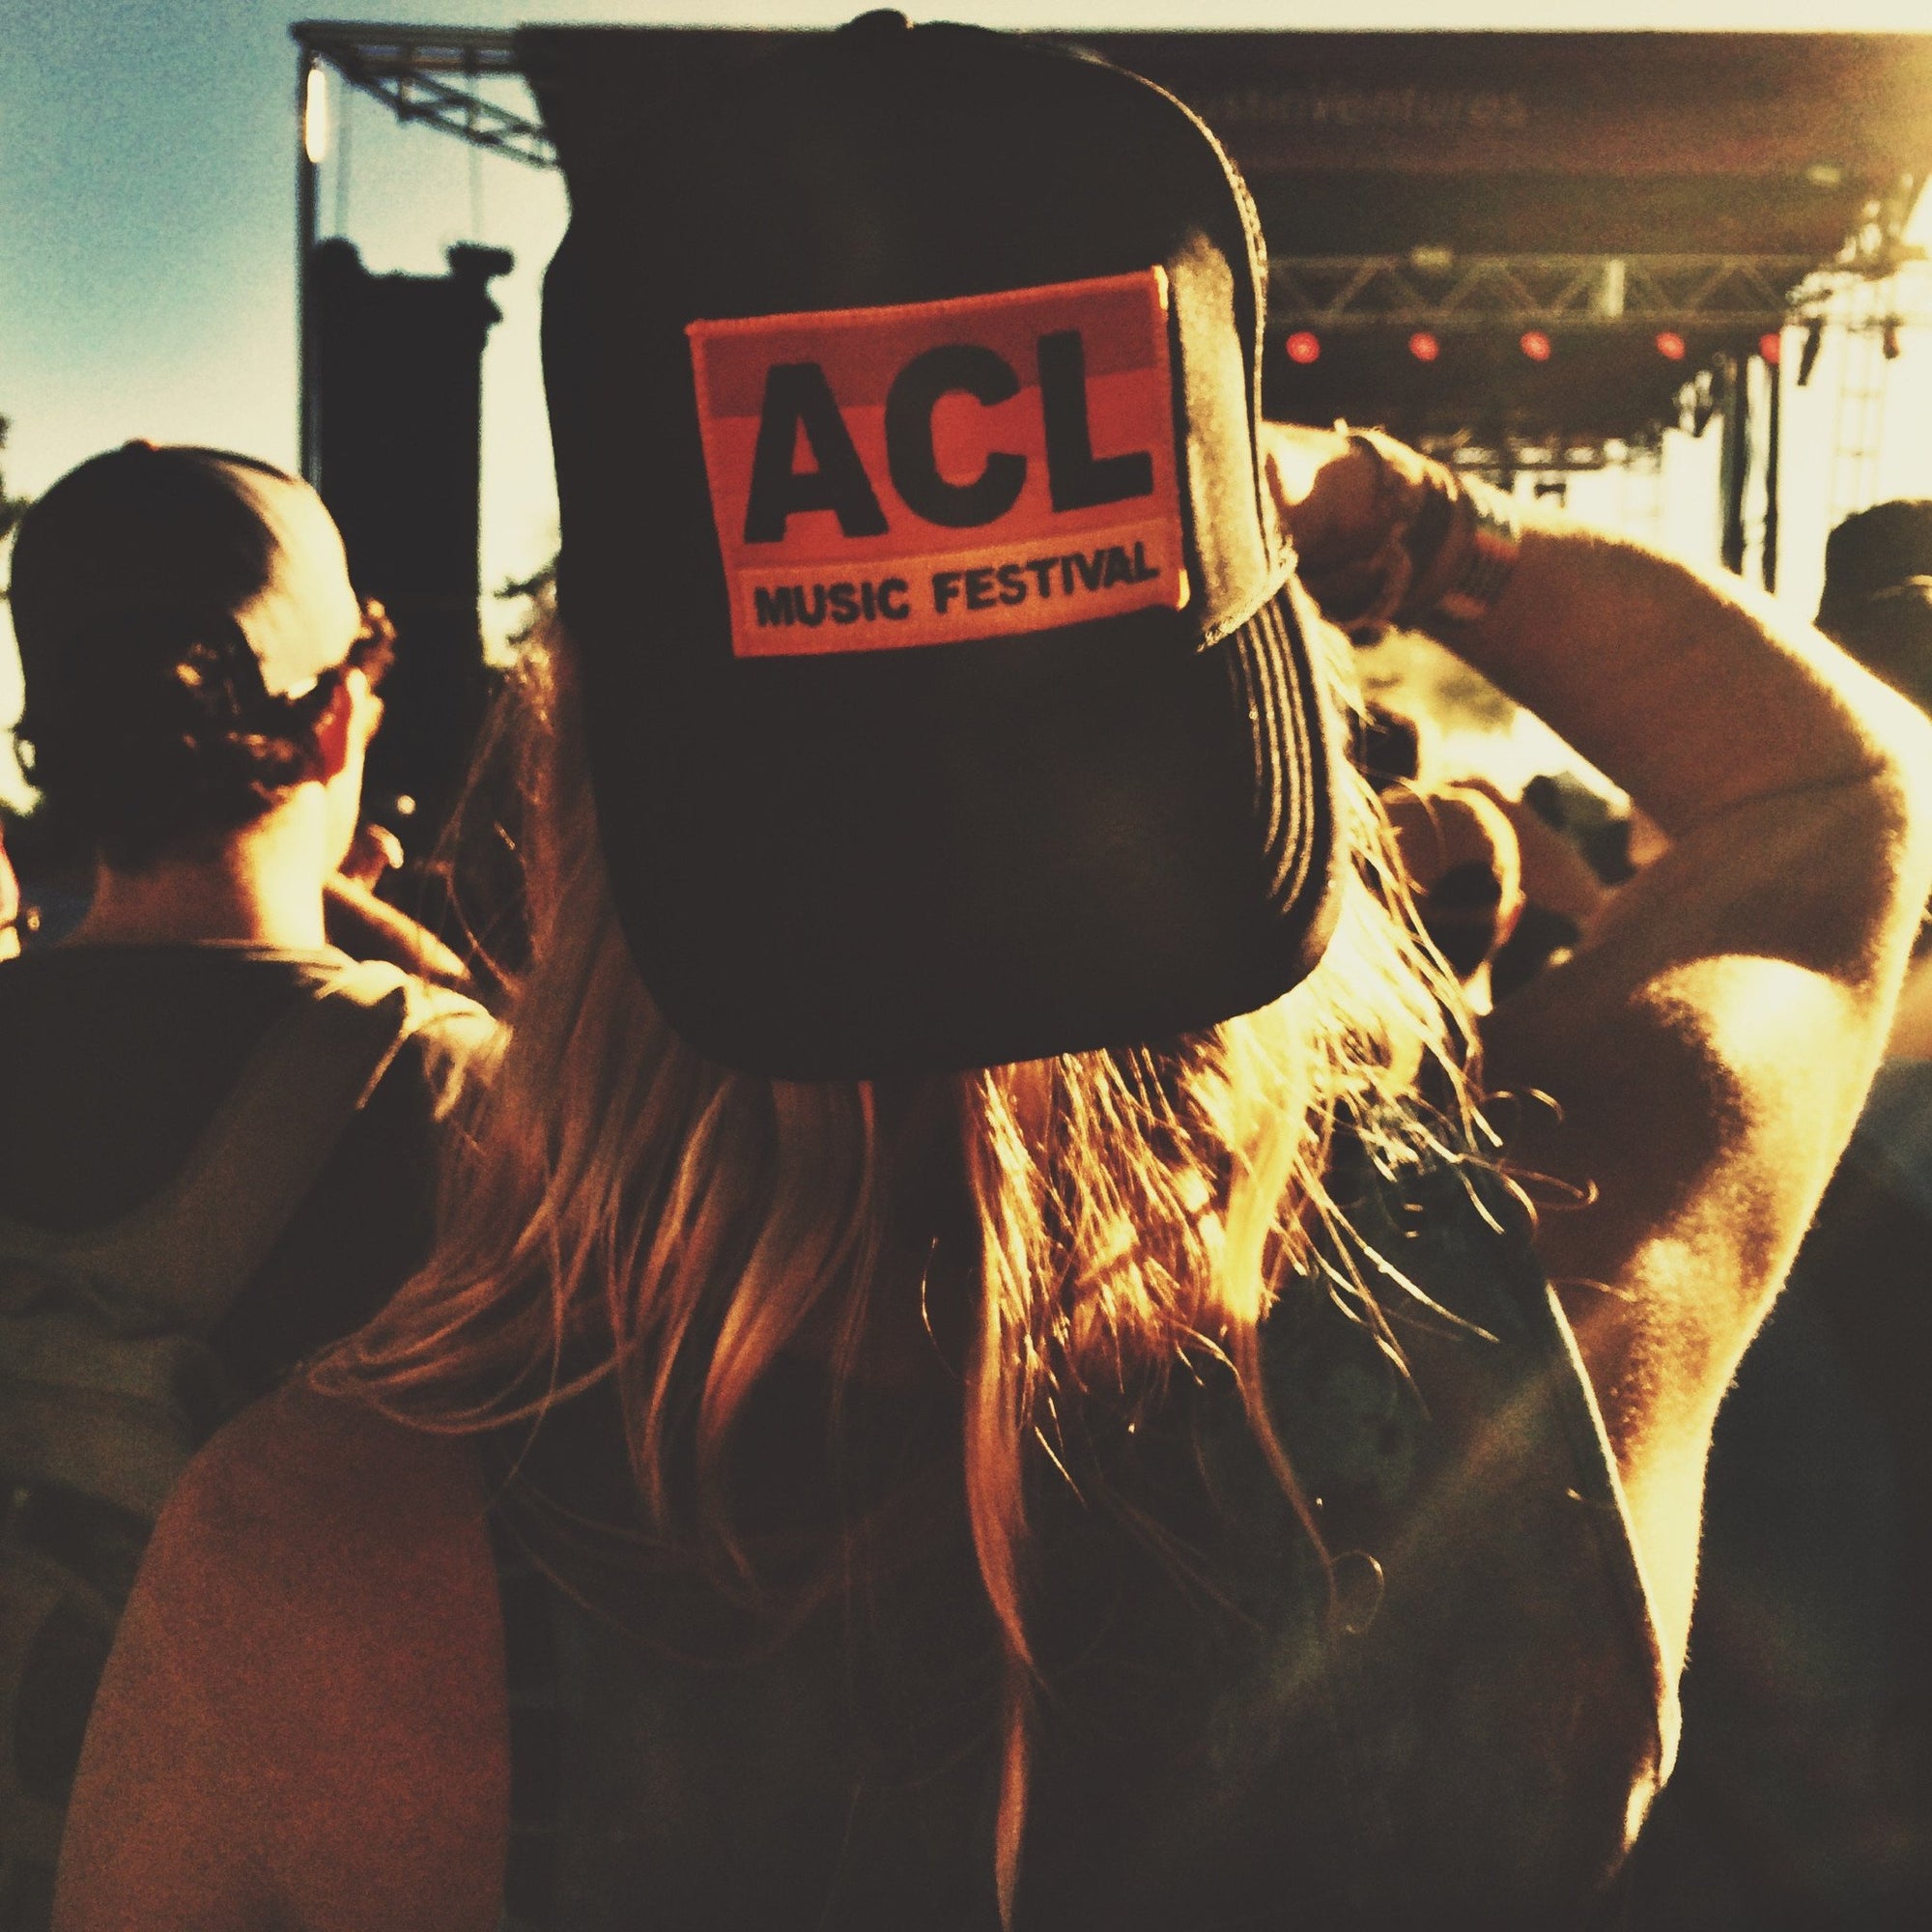 ACL festival, best friend visit, + Wake Surfing = Epic